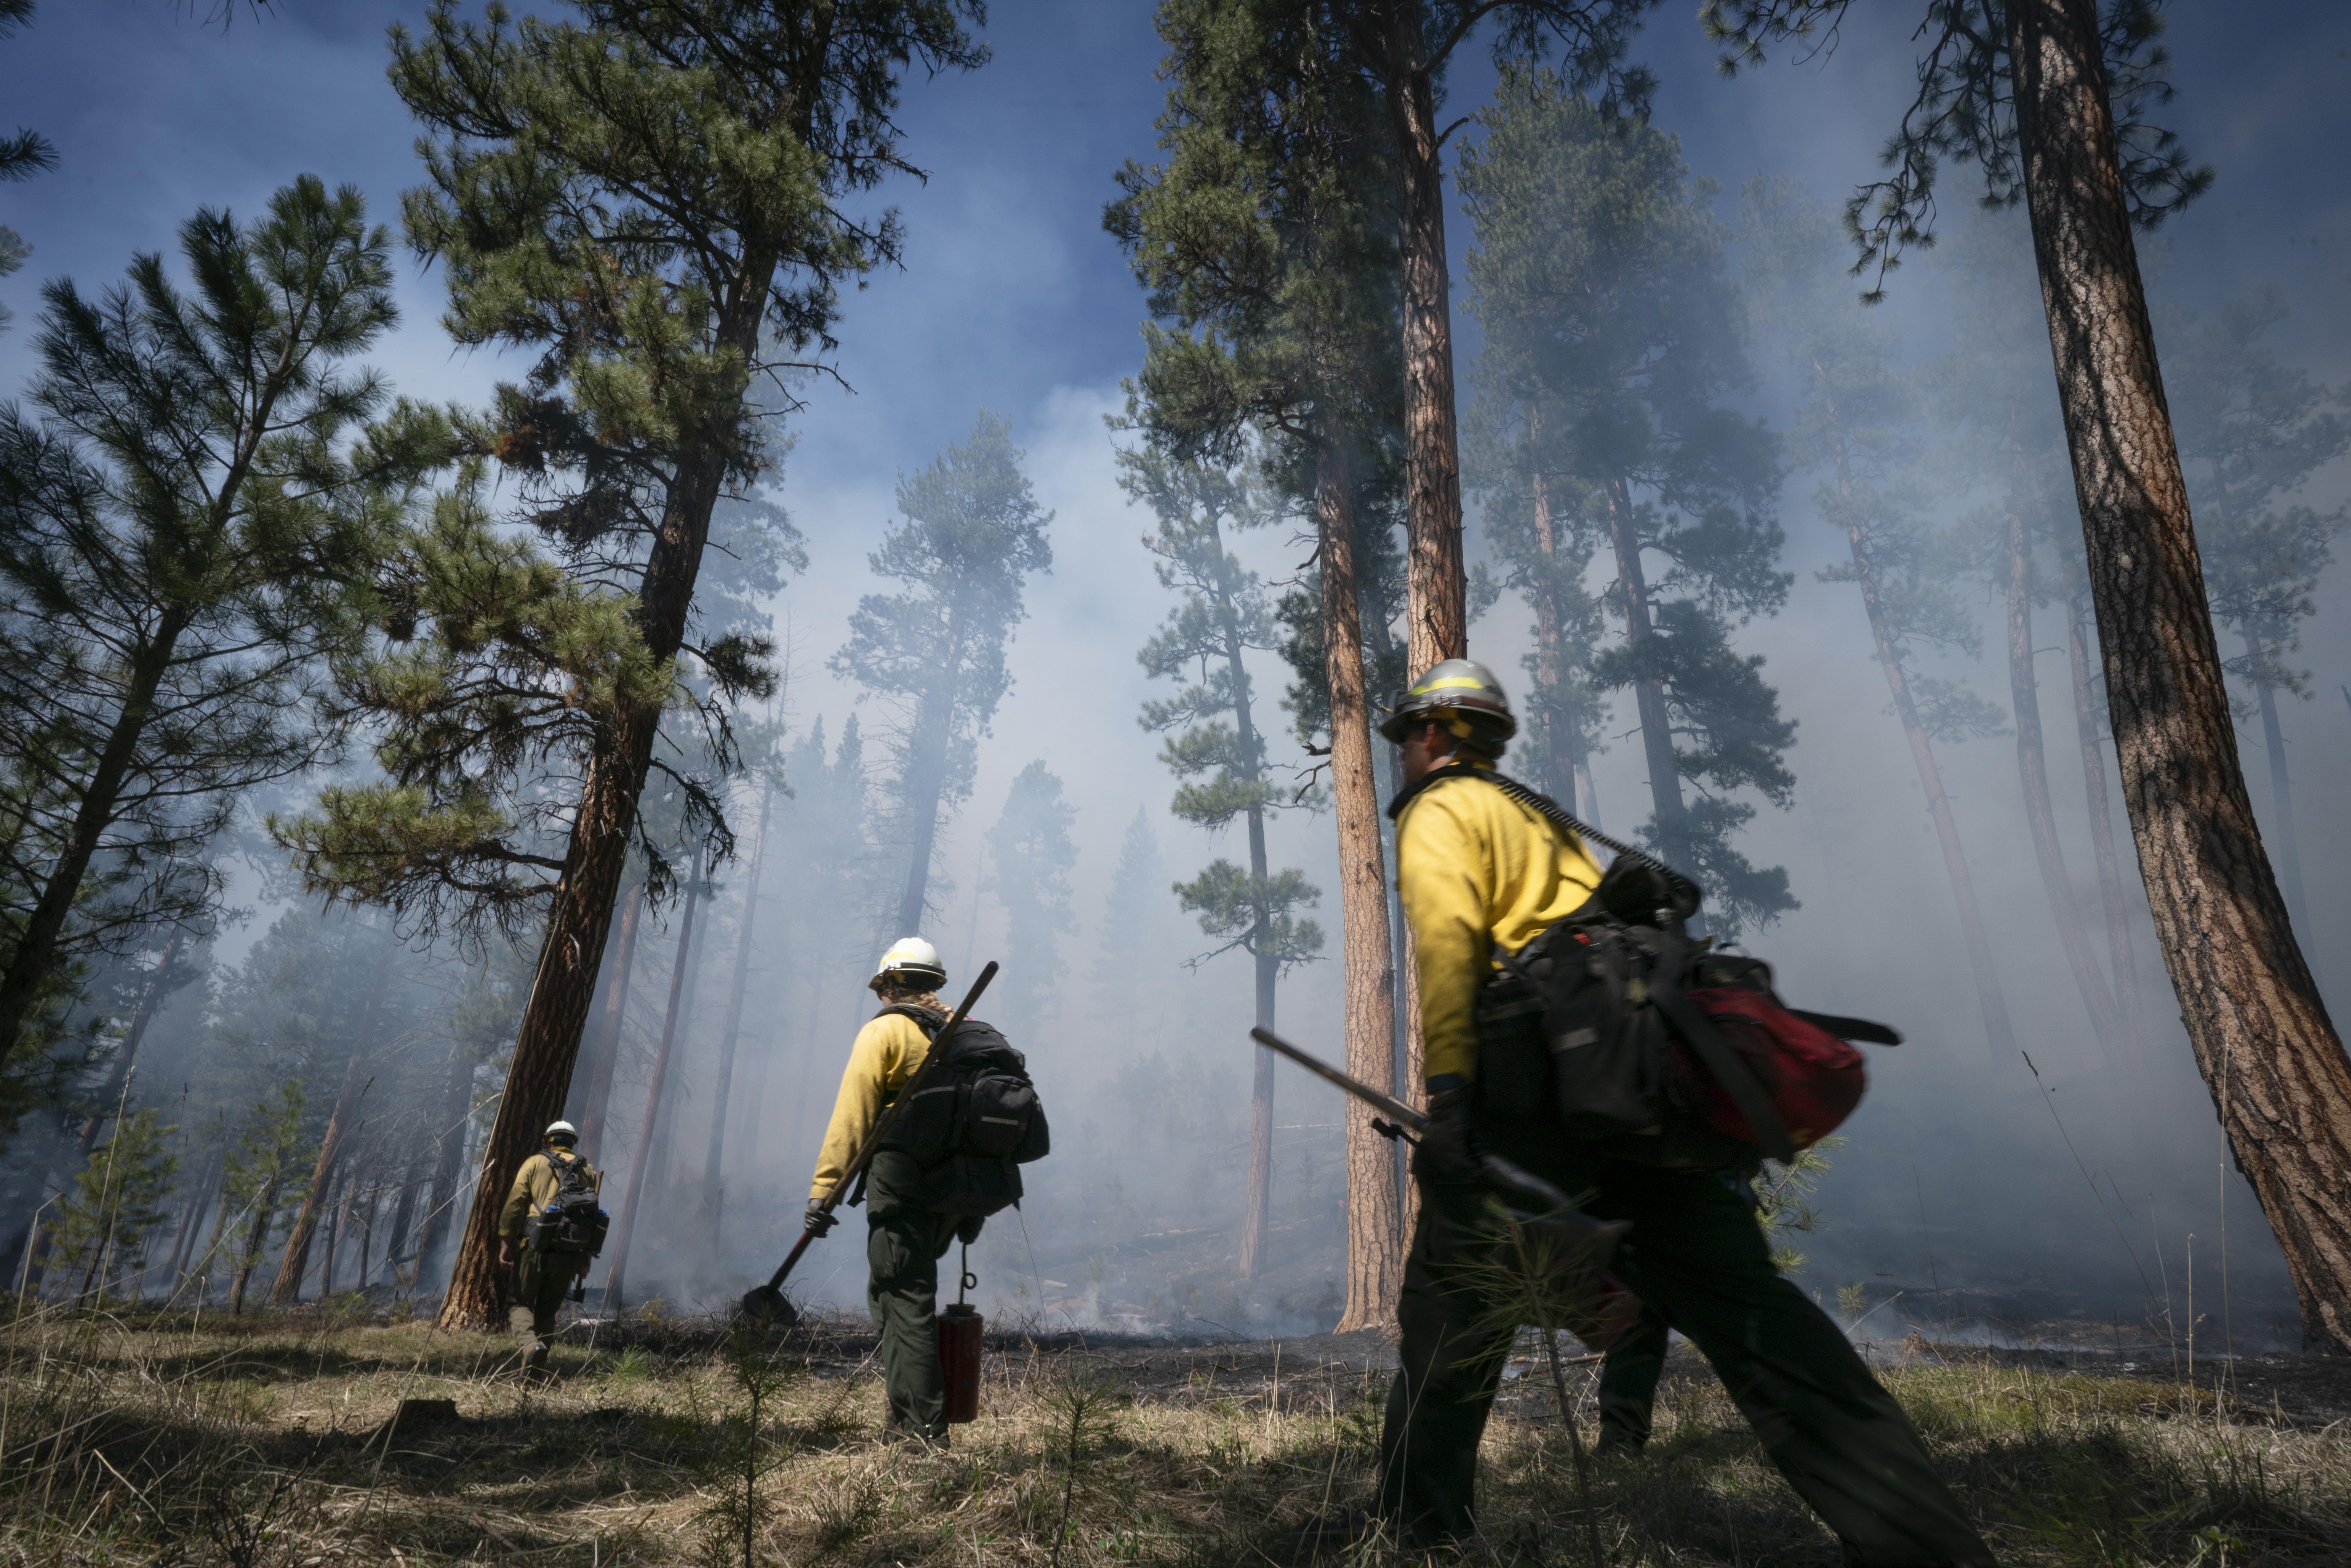 A fire crew walks the fire line on a controlled burn in western Montana.